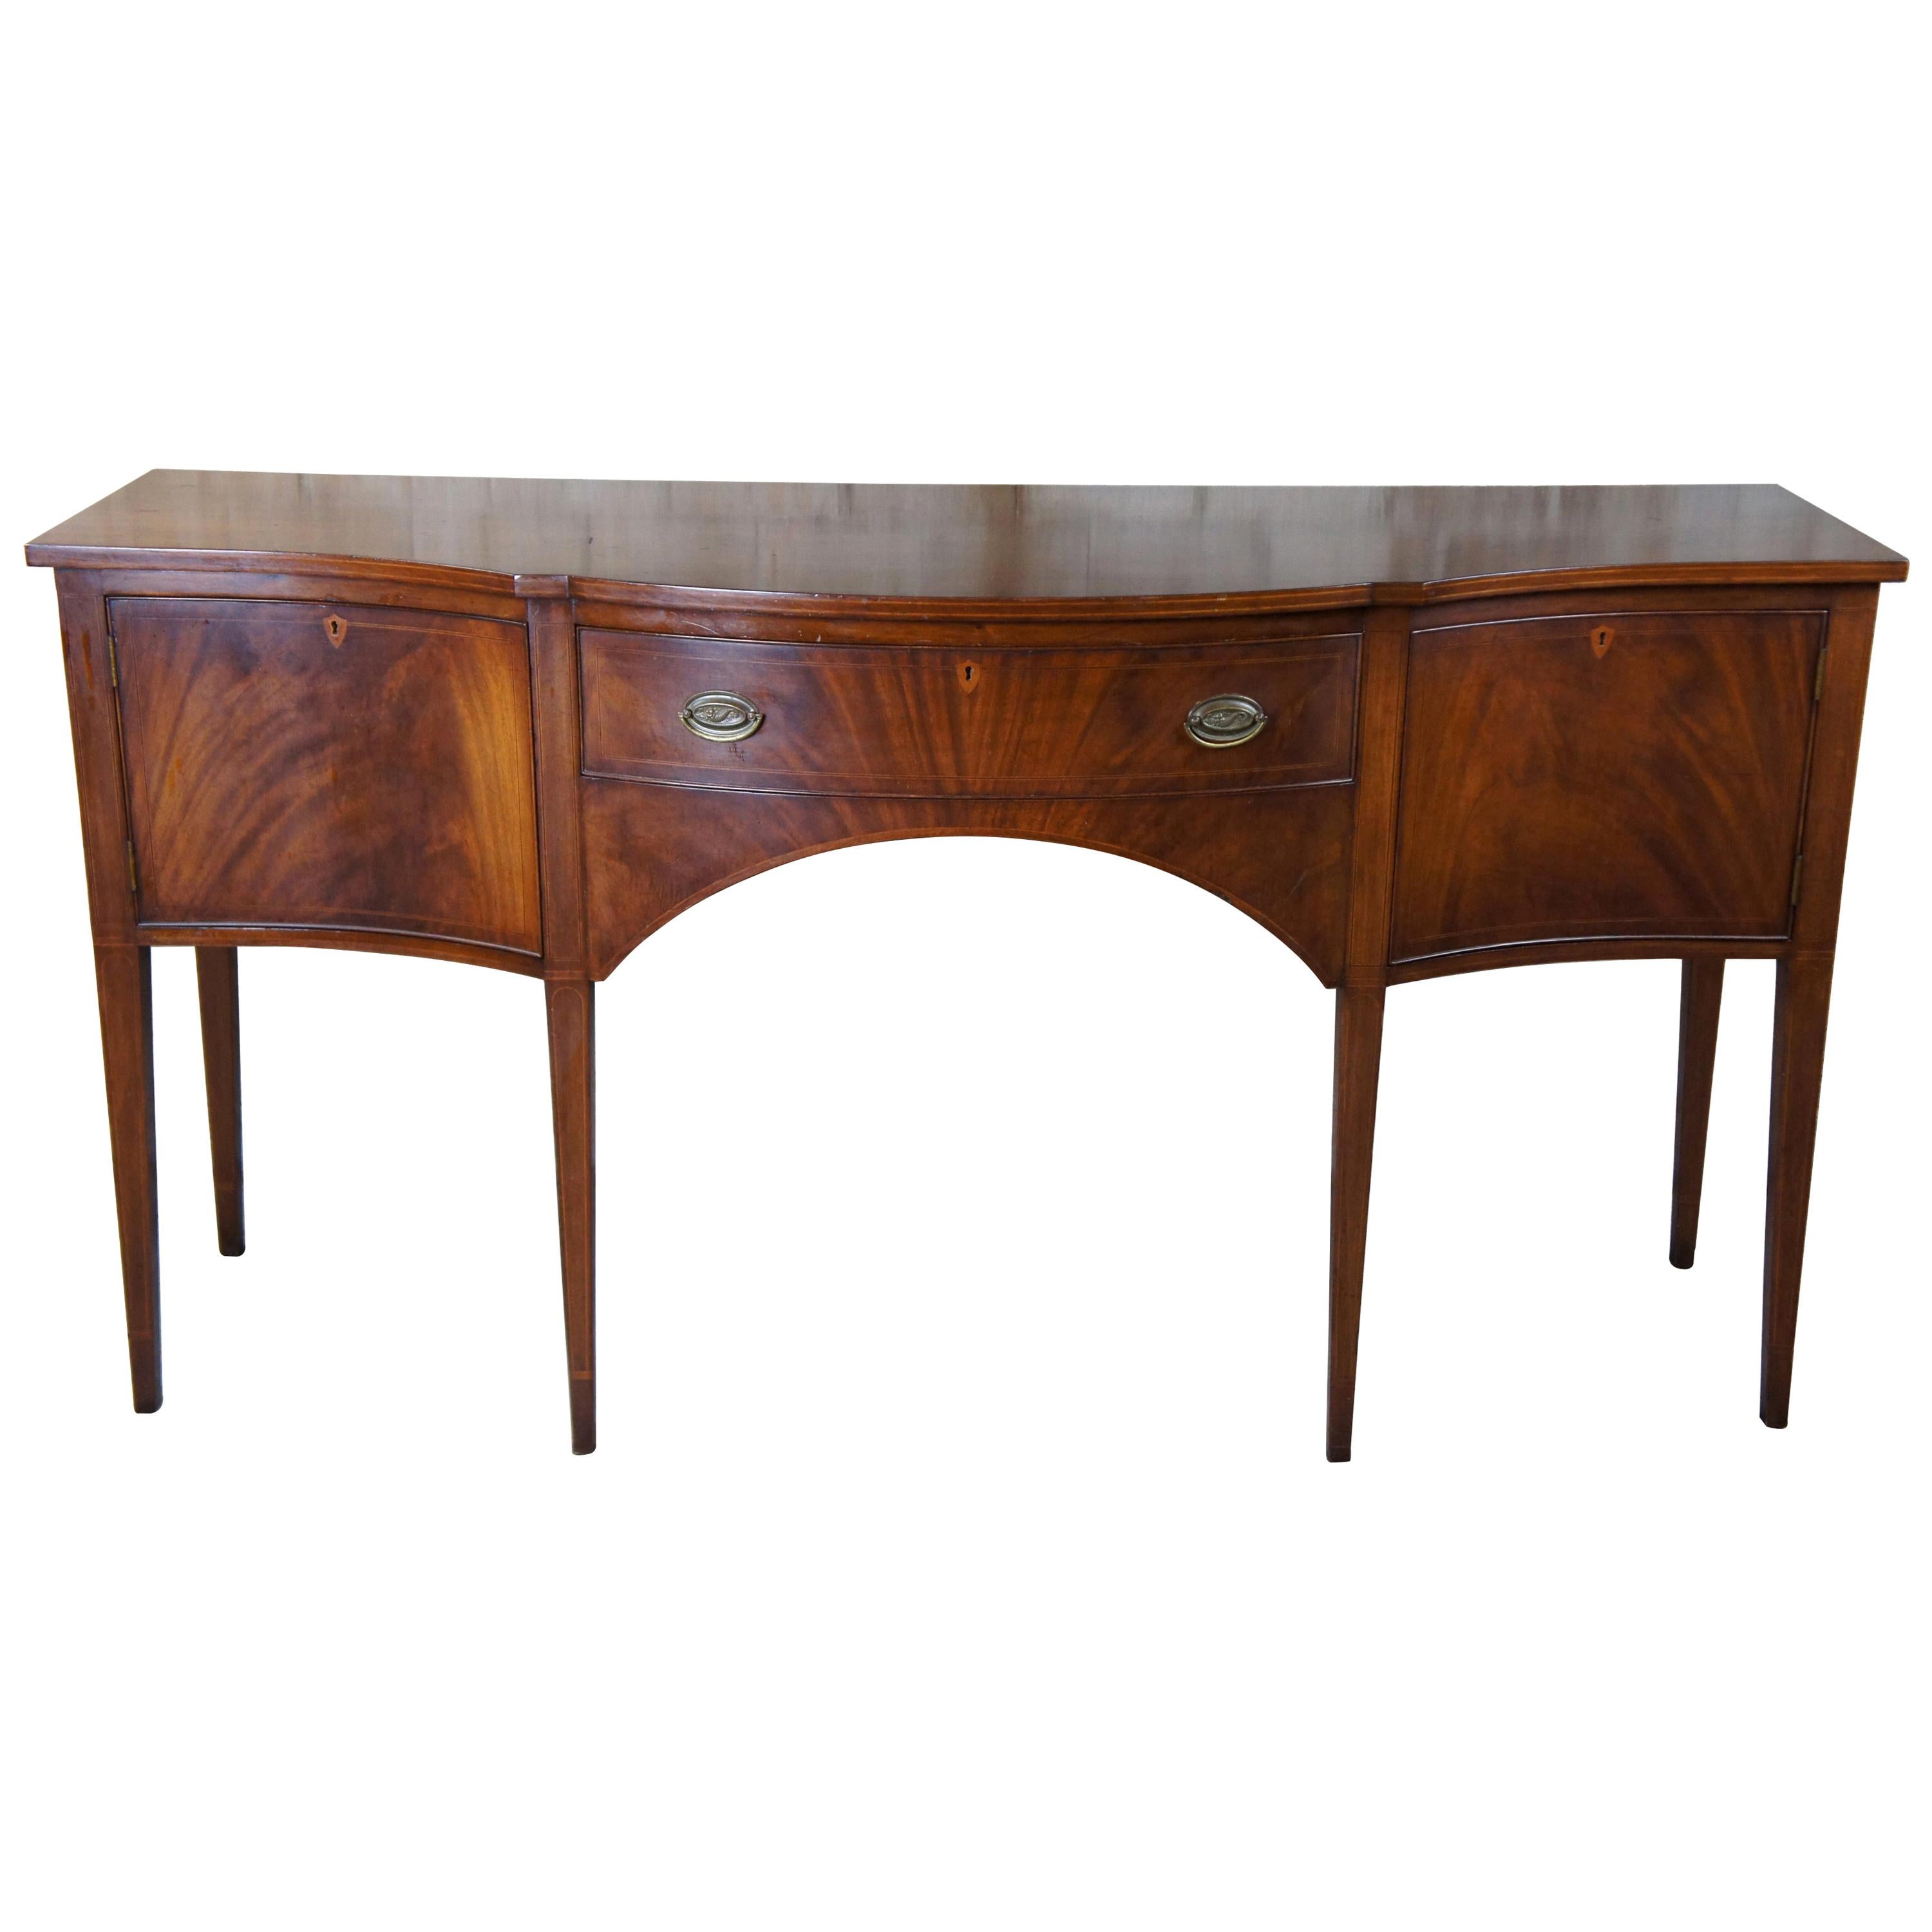 Biggs Furniture Inlaid Flamed Mahogany Federal Bow Front Sideboard Server Buffet